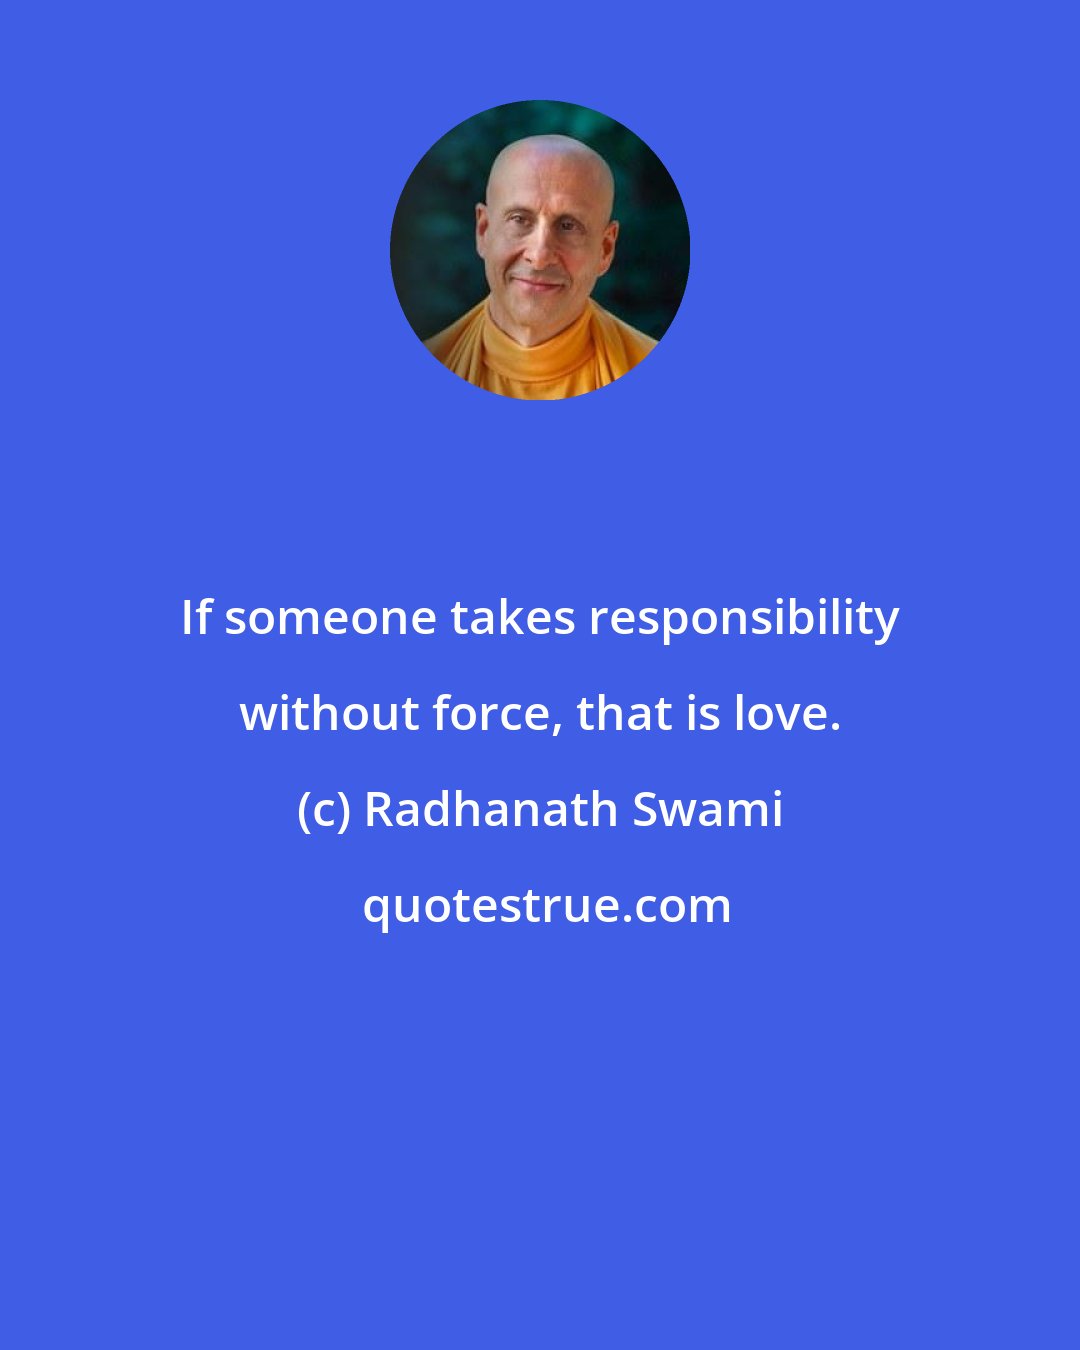 Radhanath Swami: If someone takes responsibility without force, that is love.